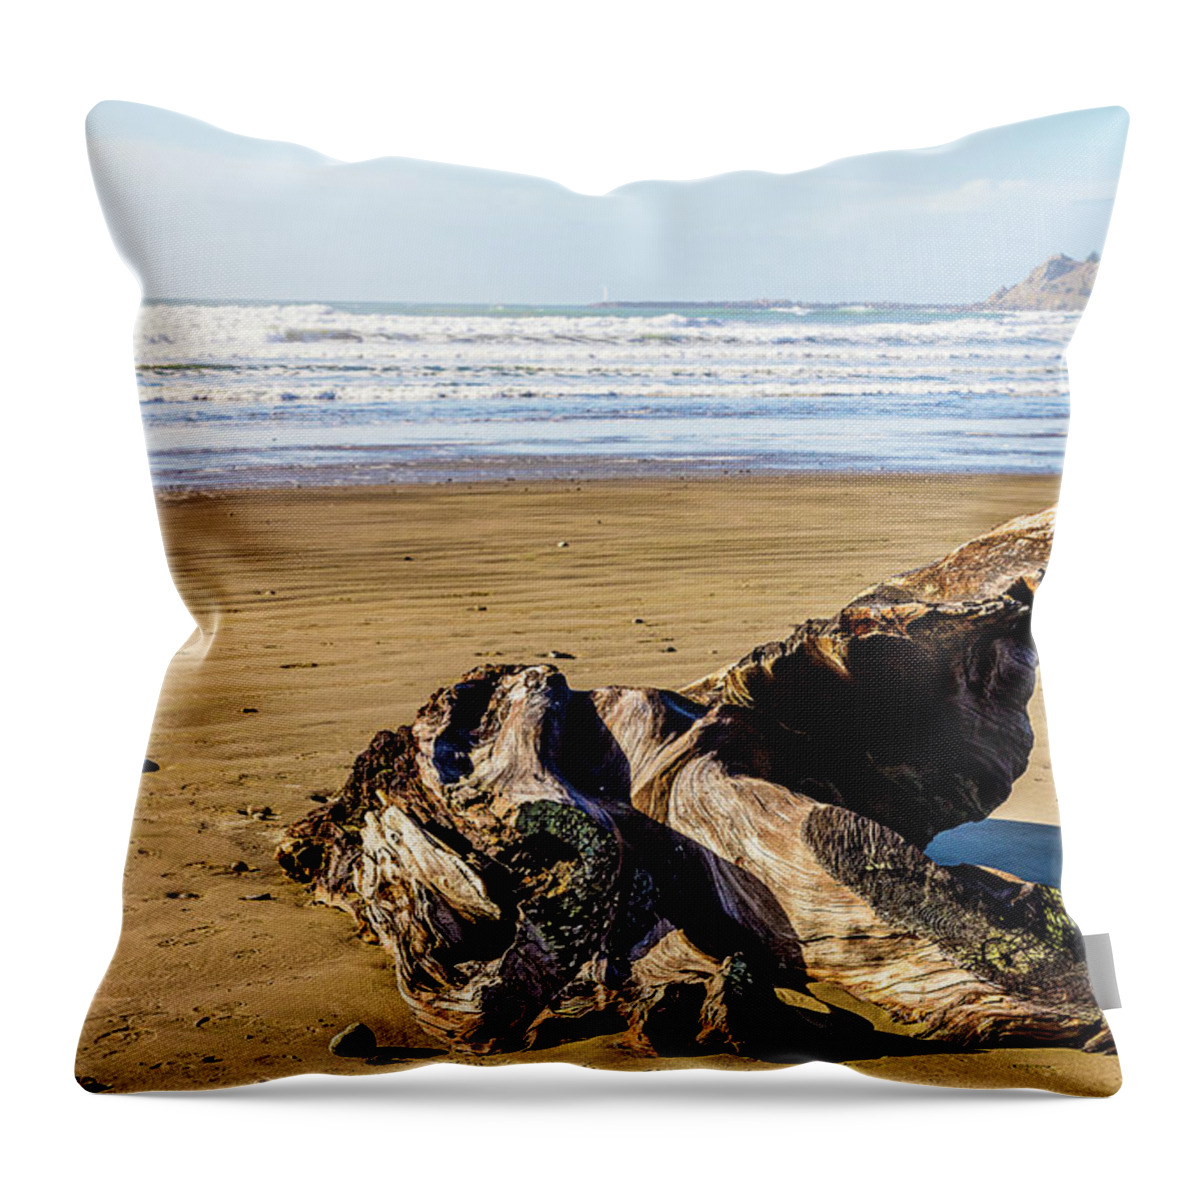 Landscape Throw Pillow featuring the photograph Coast Of Oregon-3 by Claude Dalley